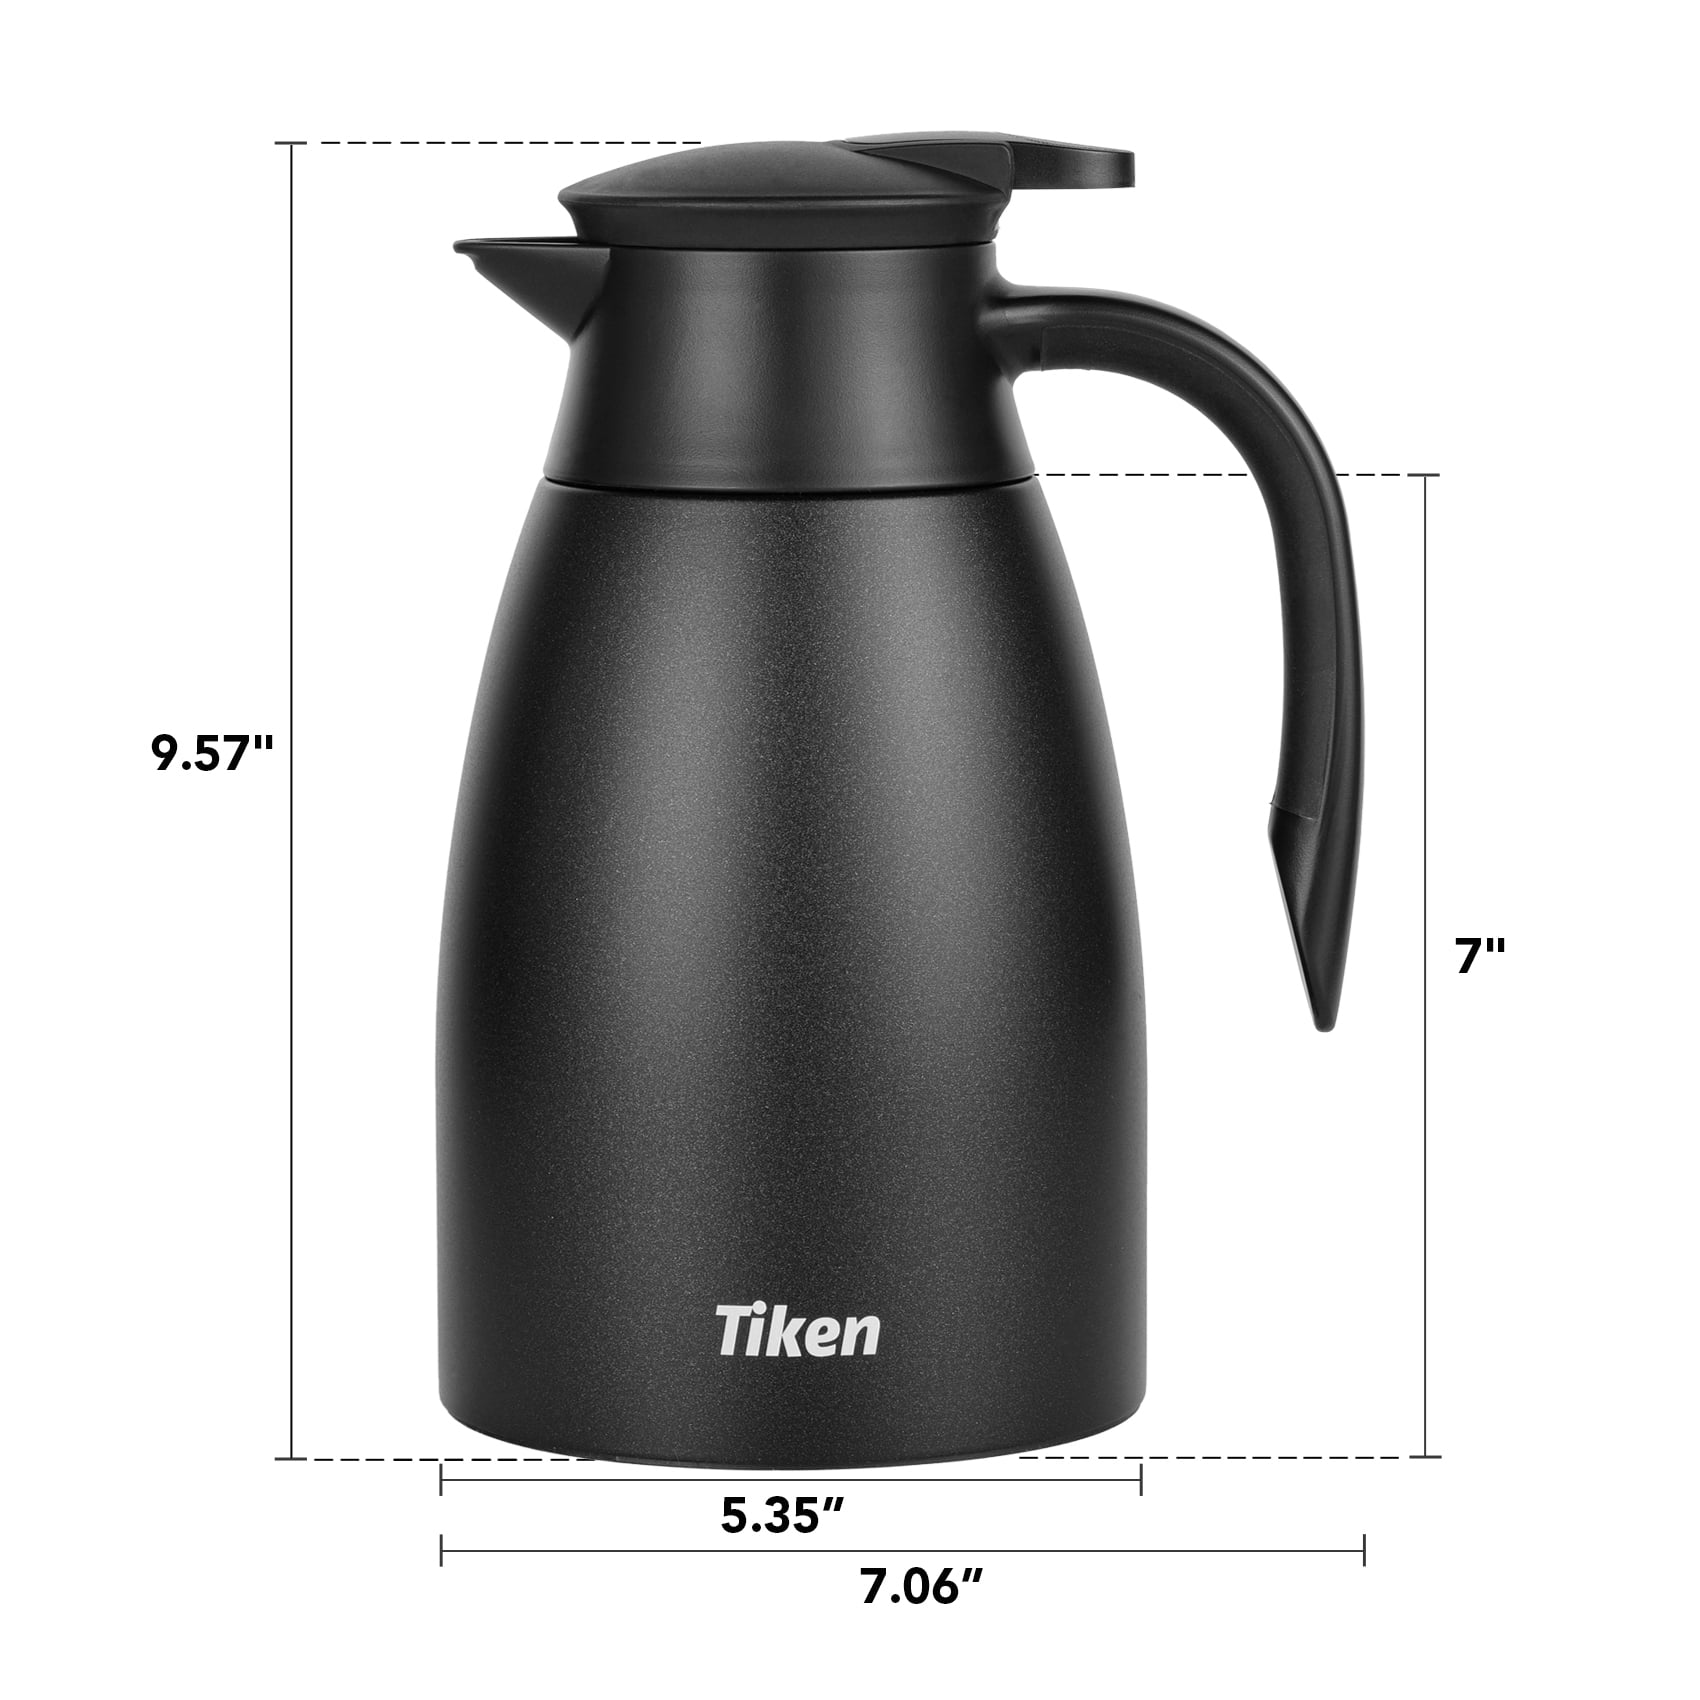 Thermal Carafe with Lid #4478